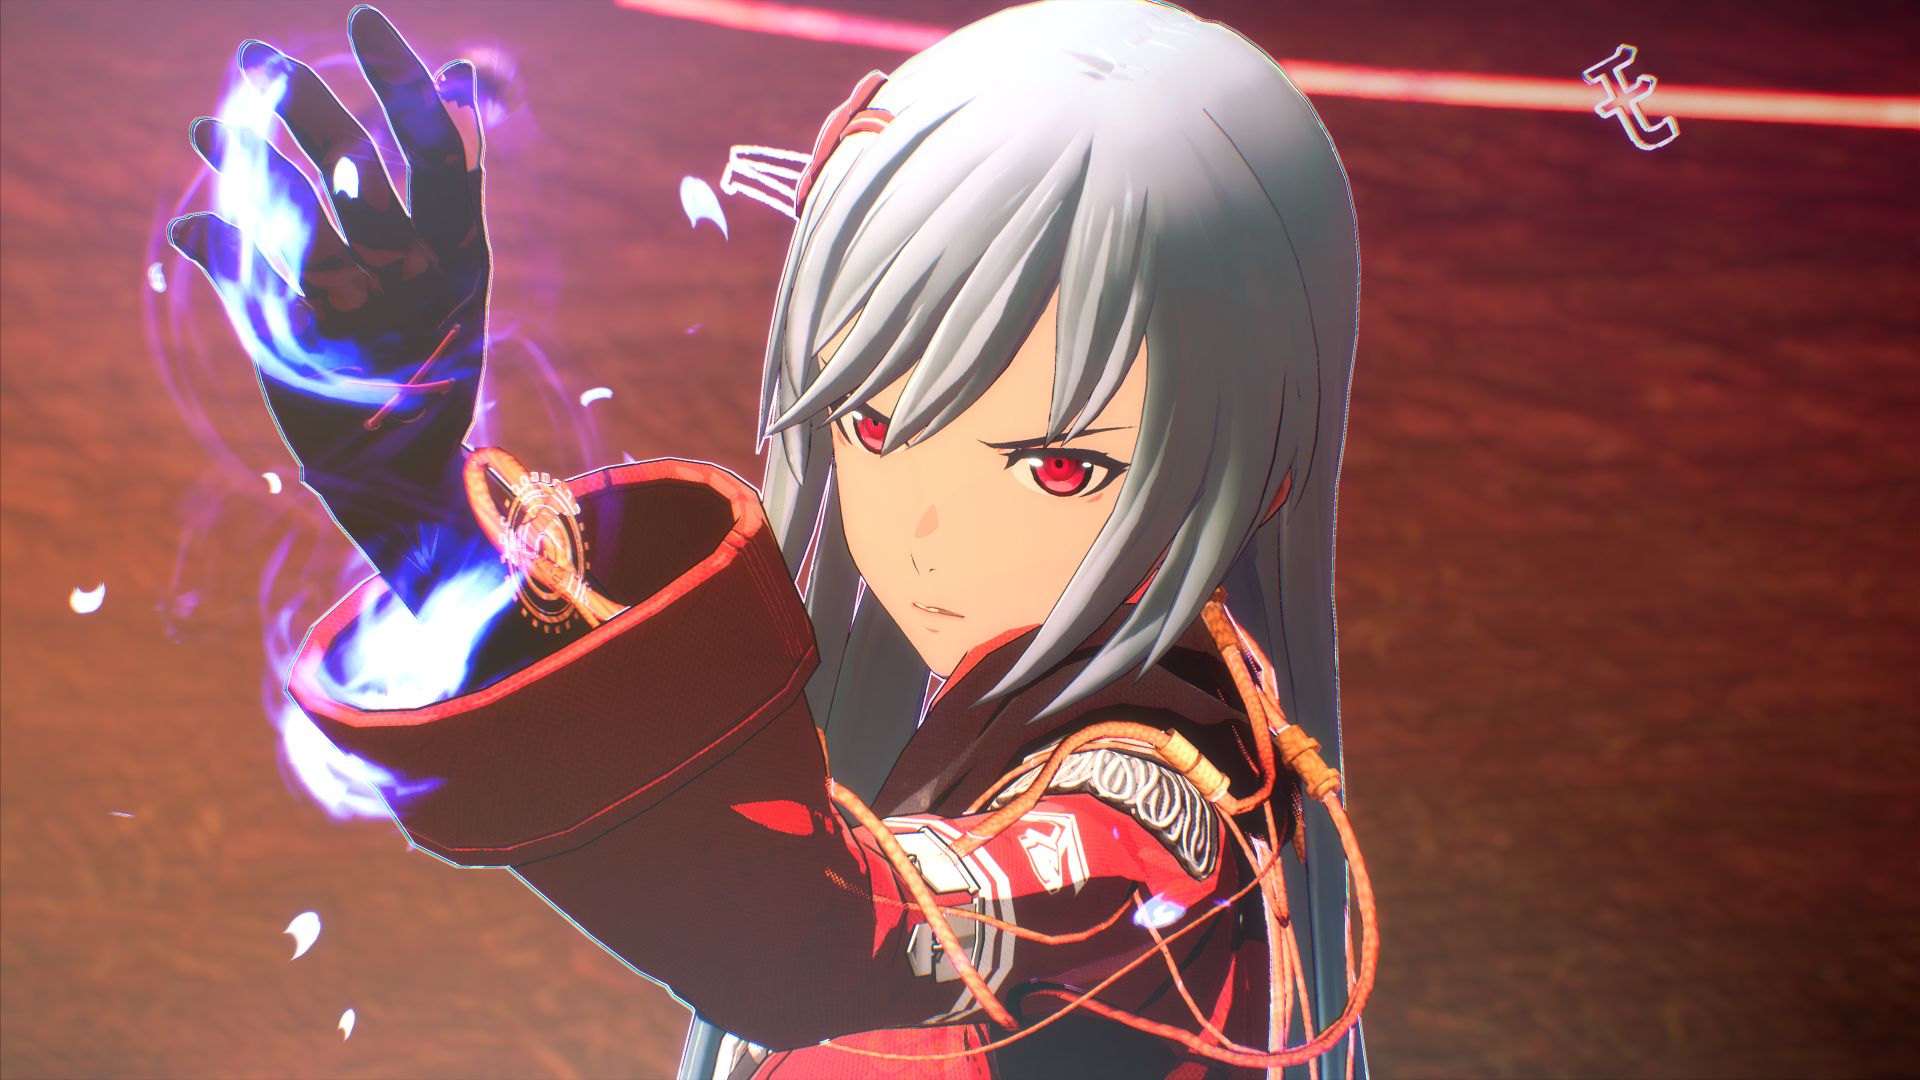 Scarlet Nexus for Xbox review: A shallow but entertaining anime